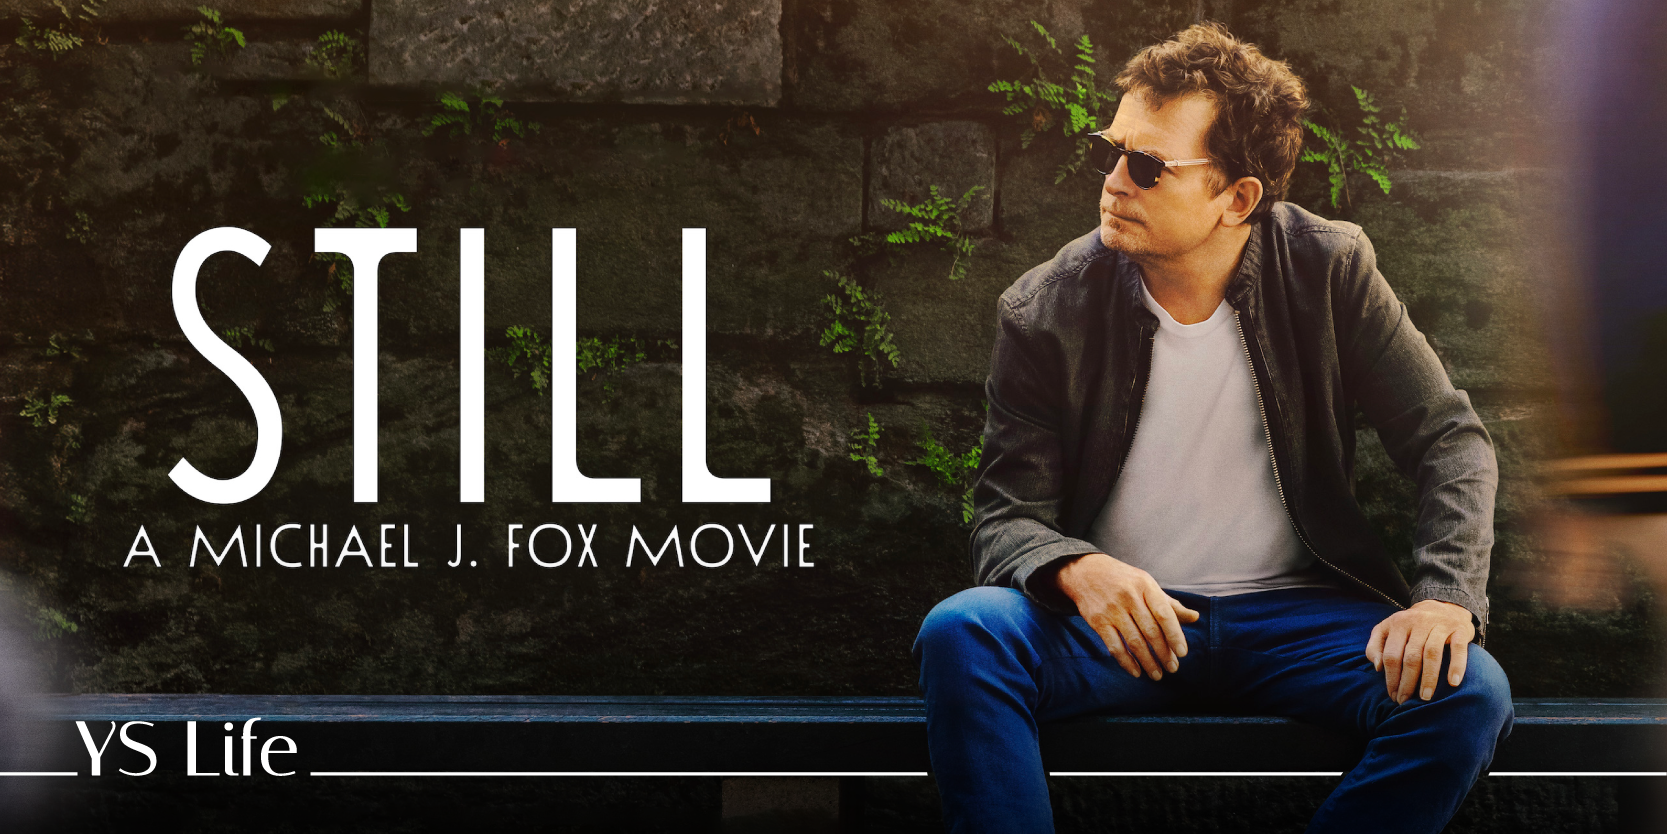 Michael J. Fox delivers a heart-warming take on his battle with Parkinson’s in Still